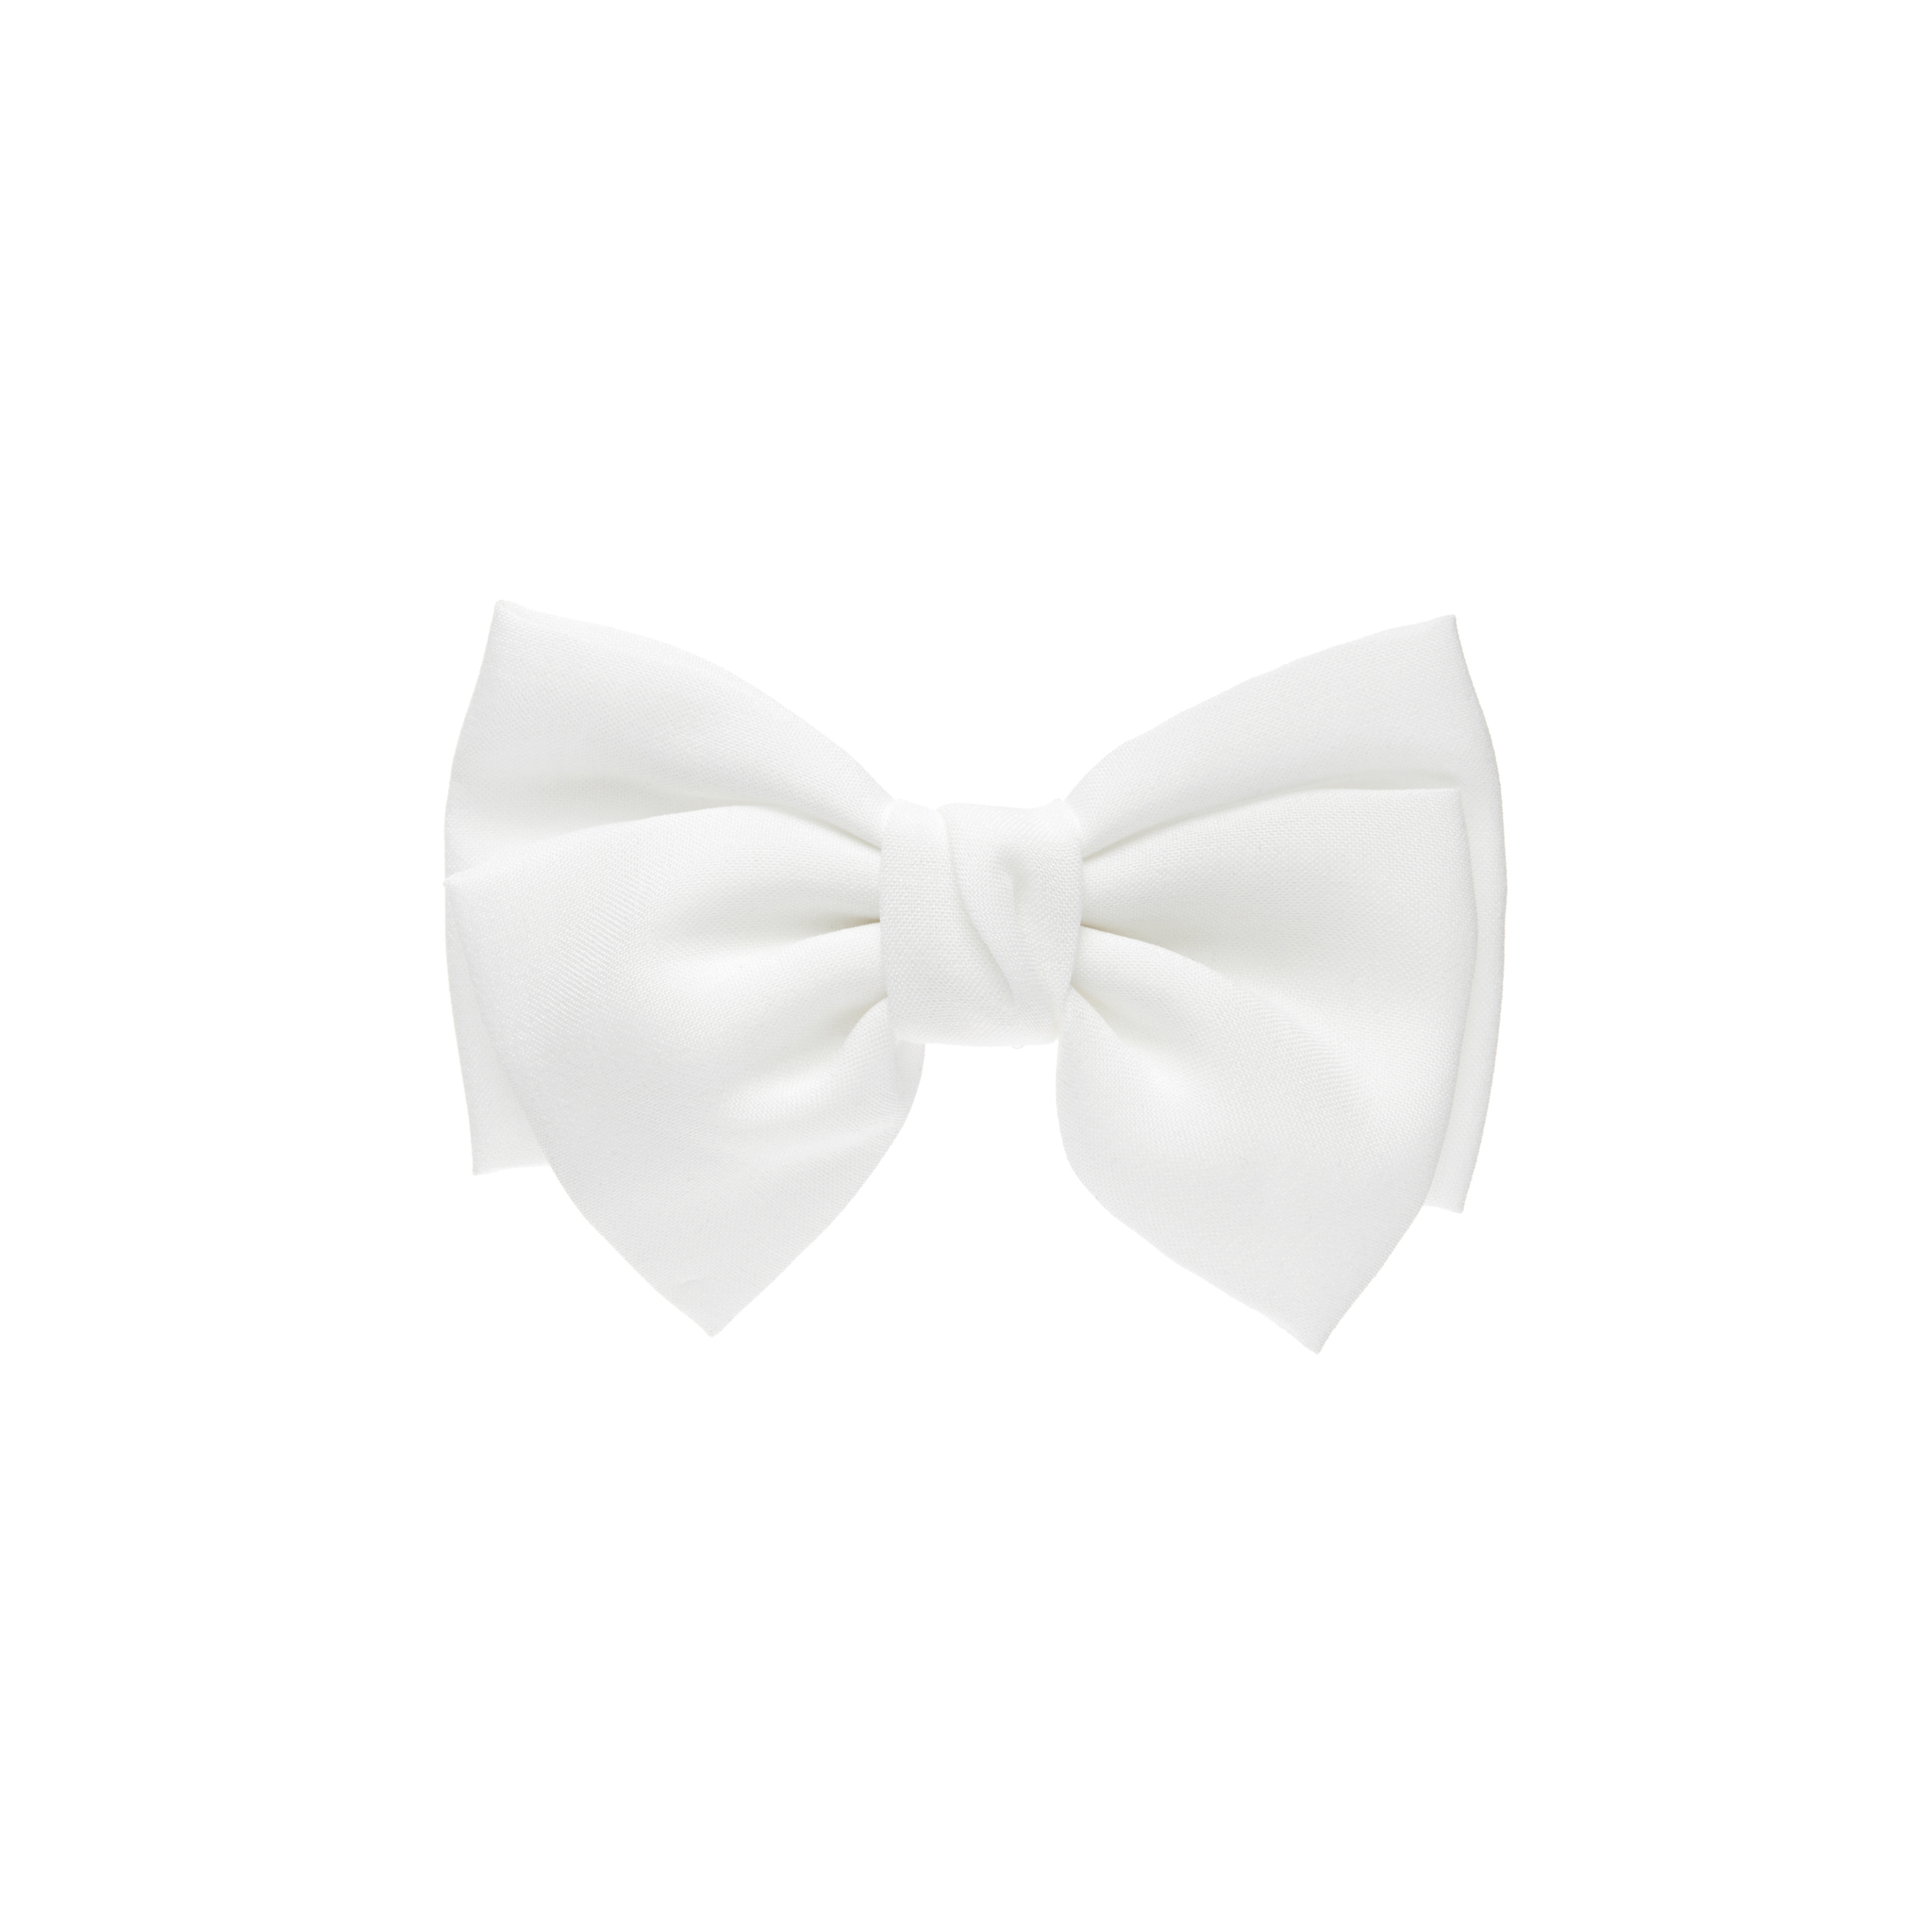 HOLLY JUNE Заколка Bow Hair Clip – White déjà vu заколка soft pink bow hair clip